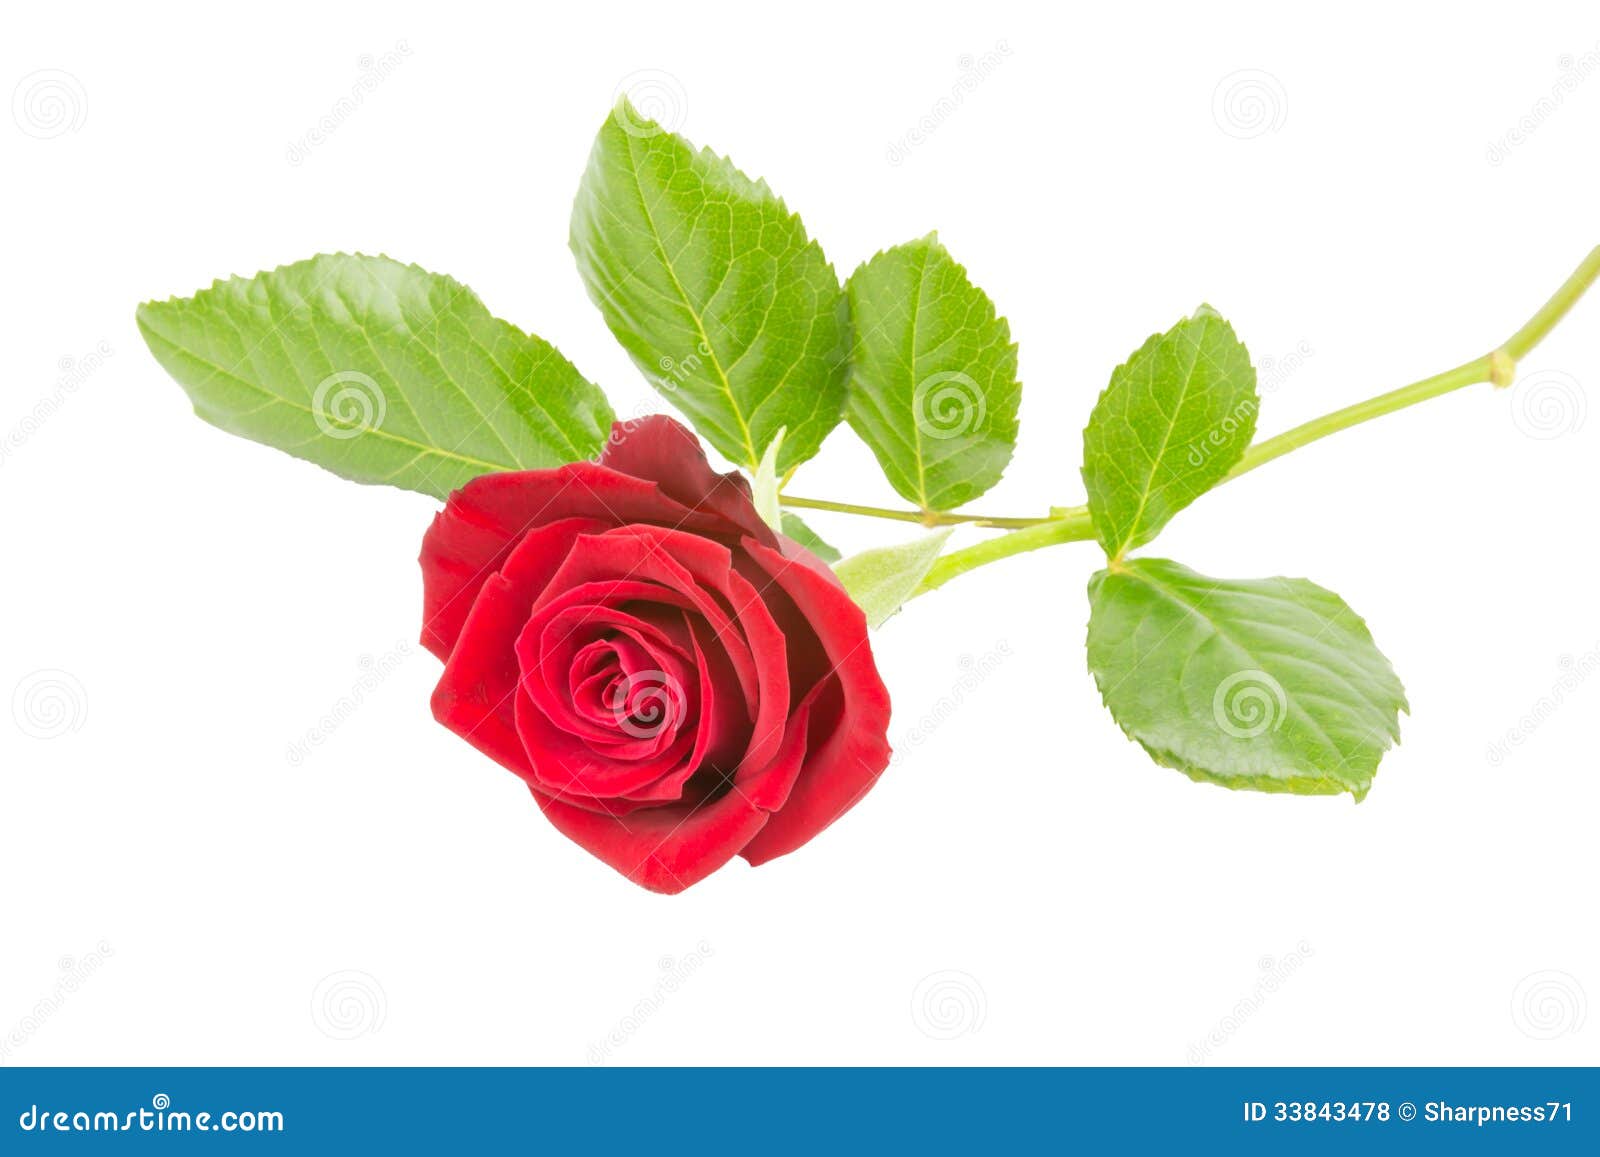 Red roses stock photo. Image of leaves, flower, present - 33843478